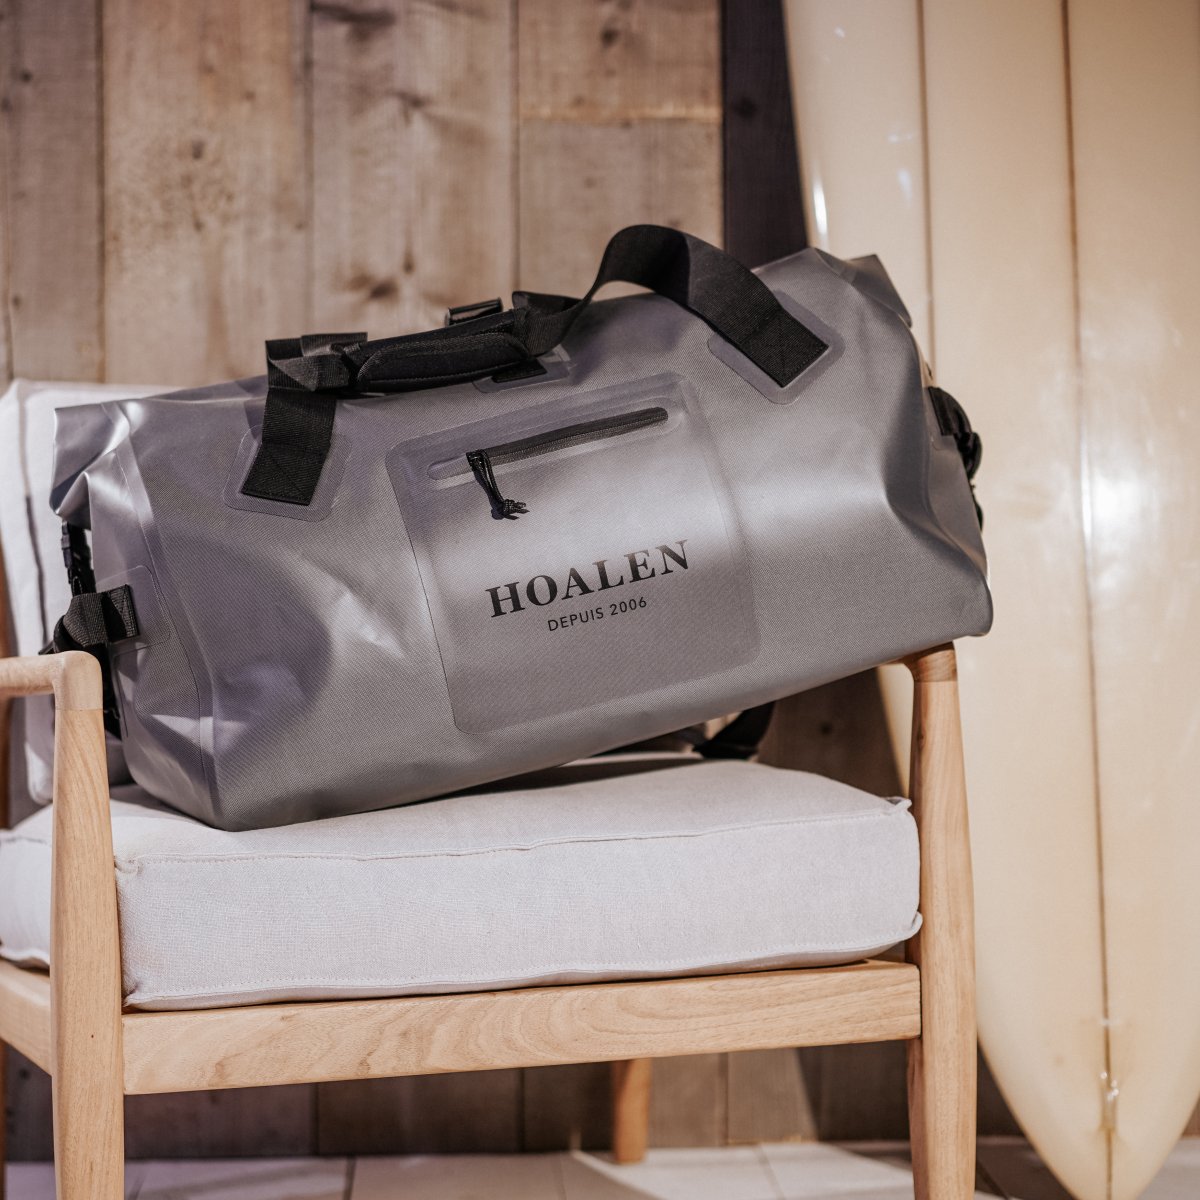 Our Sailor Bag offers waterproof protection on long trips. 